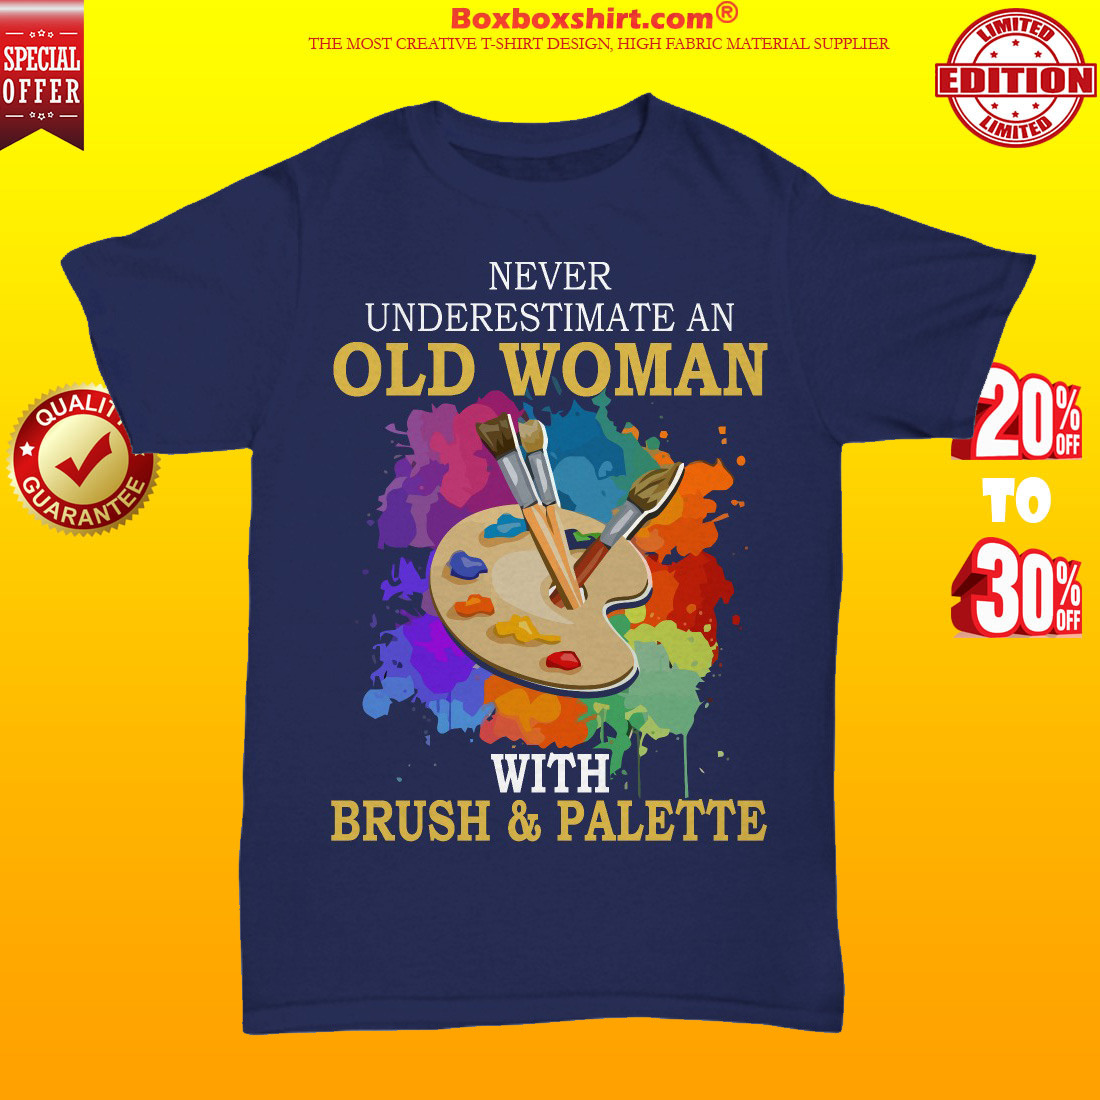 Never underestimate an old woman with brush and palette unisex tee shirt